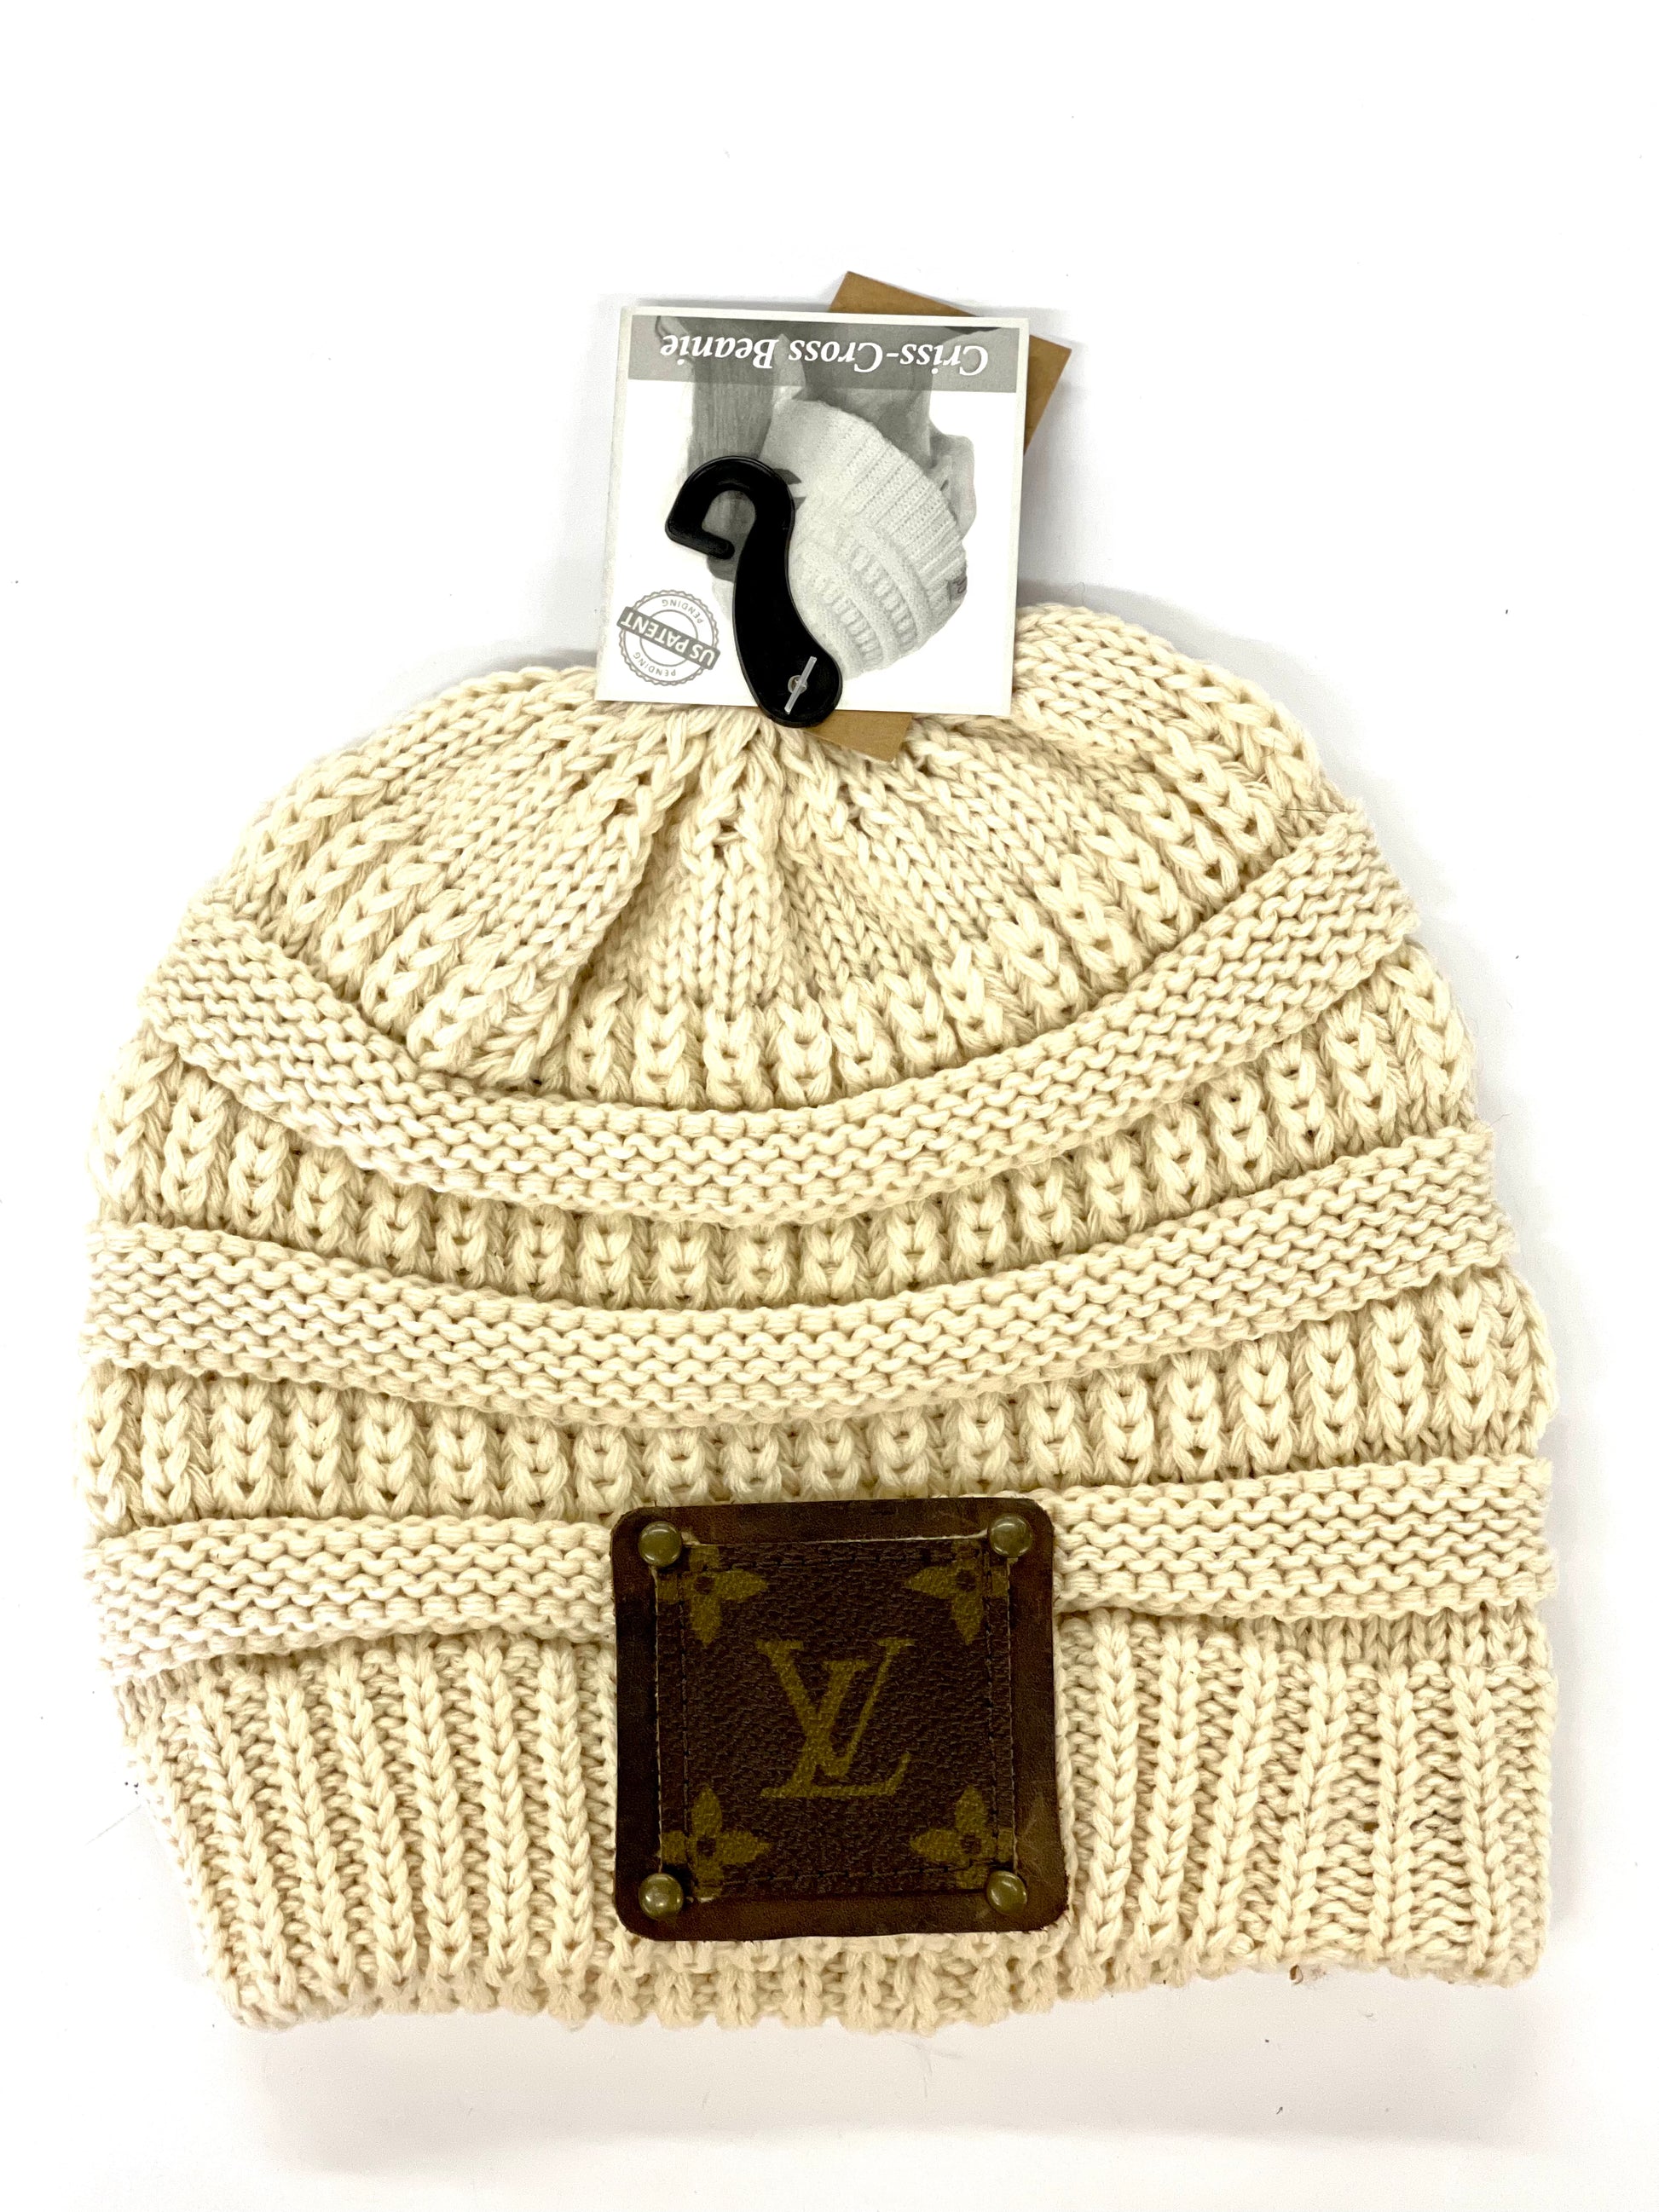 Cream Beanie (x-cross pony back) with brown patch antique hardware - Patches Of Upcycling